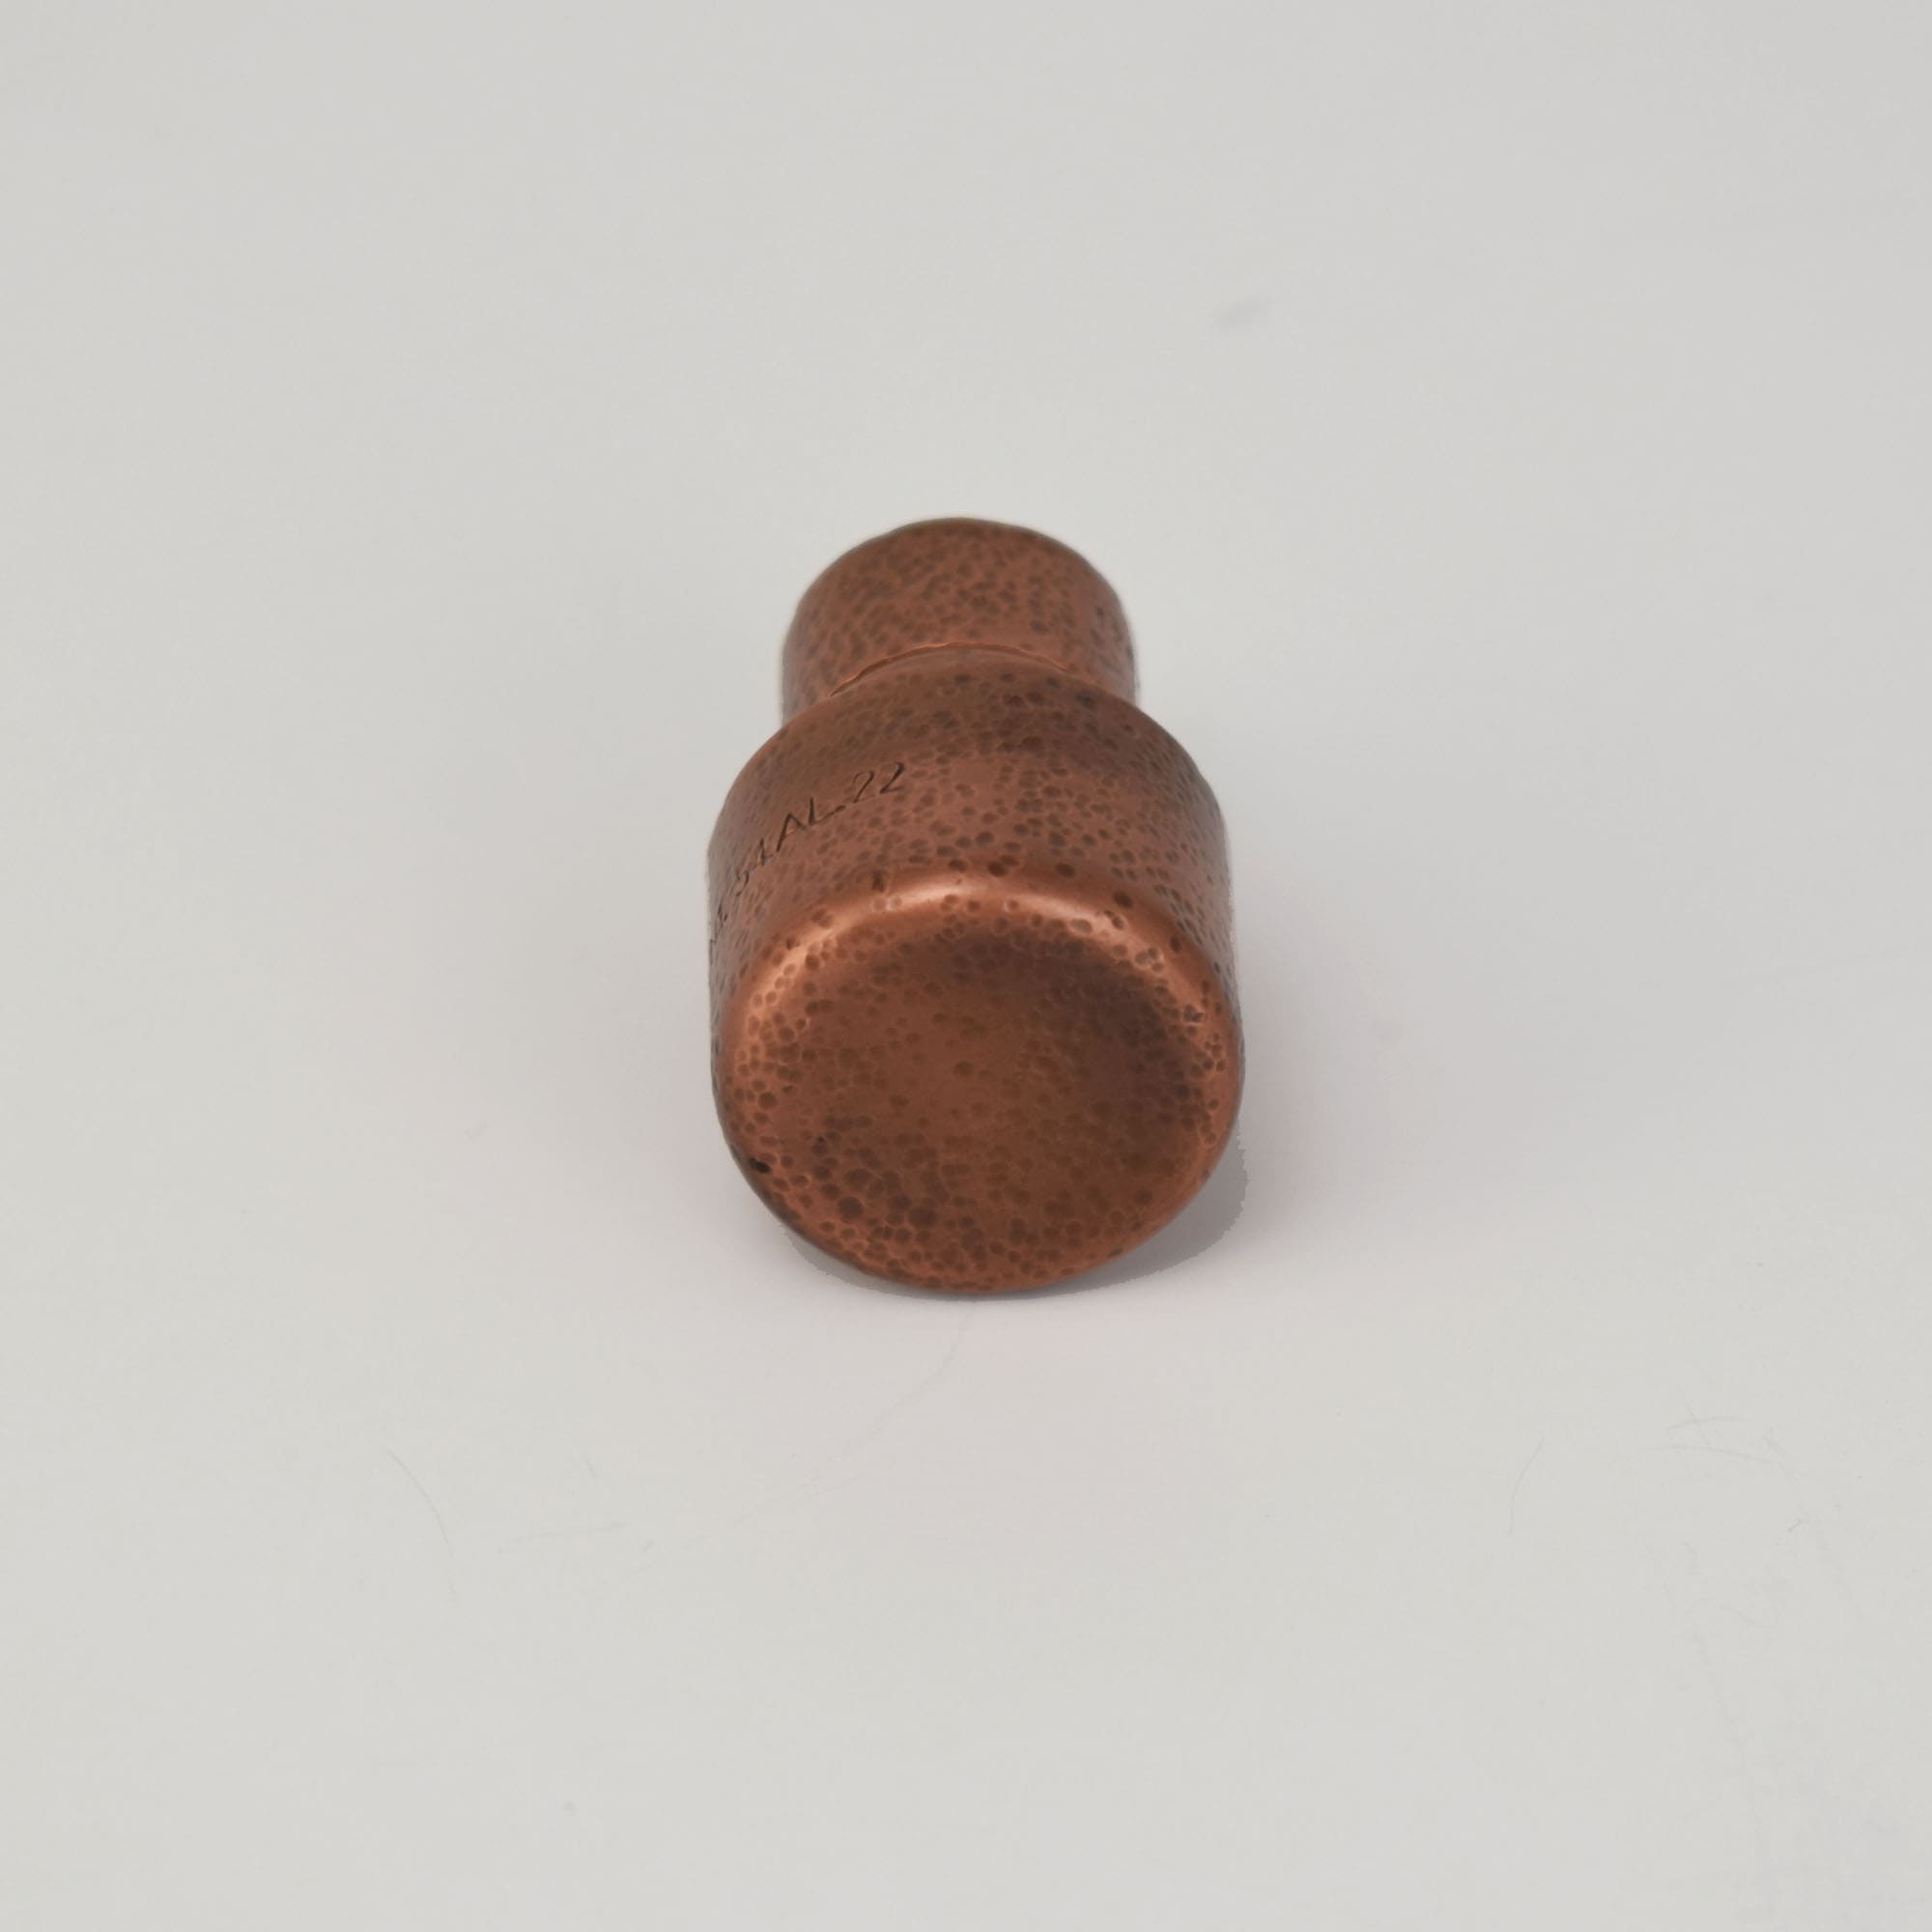 Aged Copper Raised Dimple Knob - On White Surface